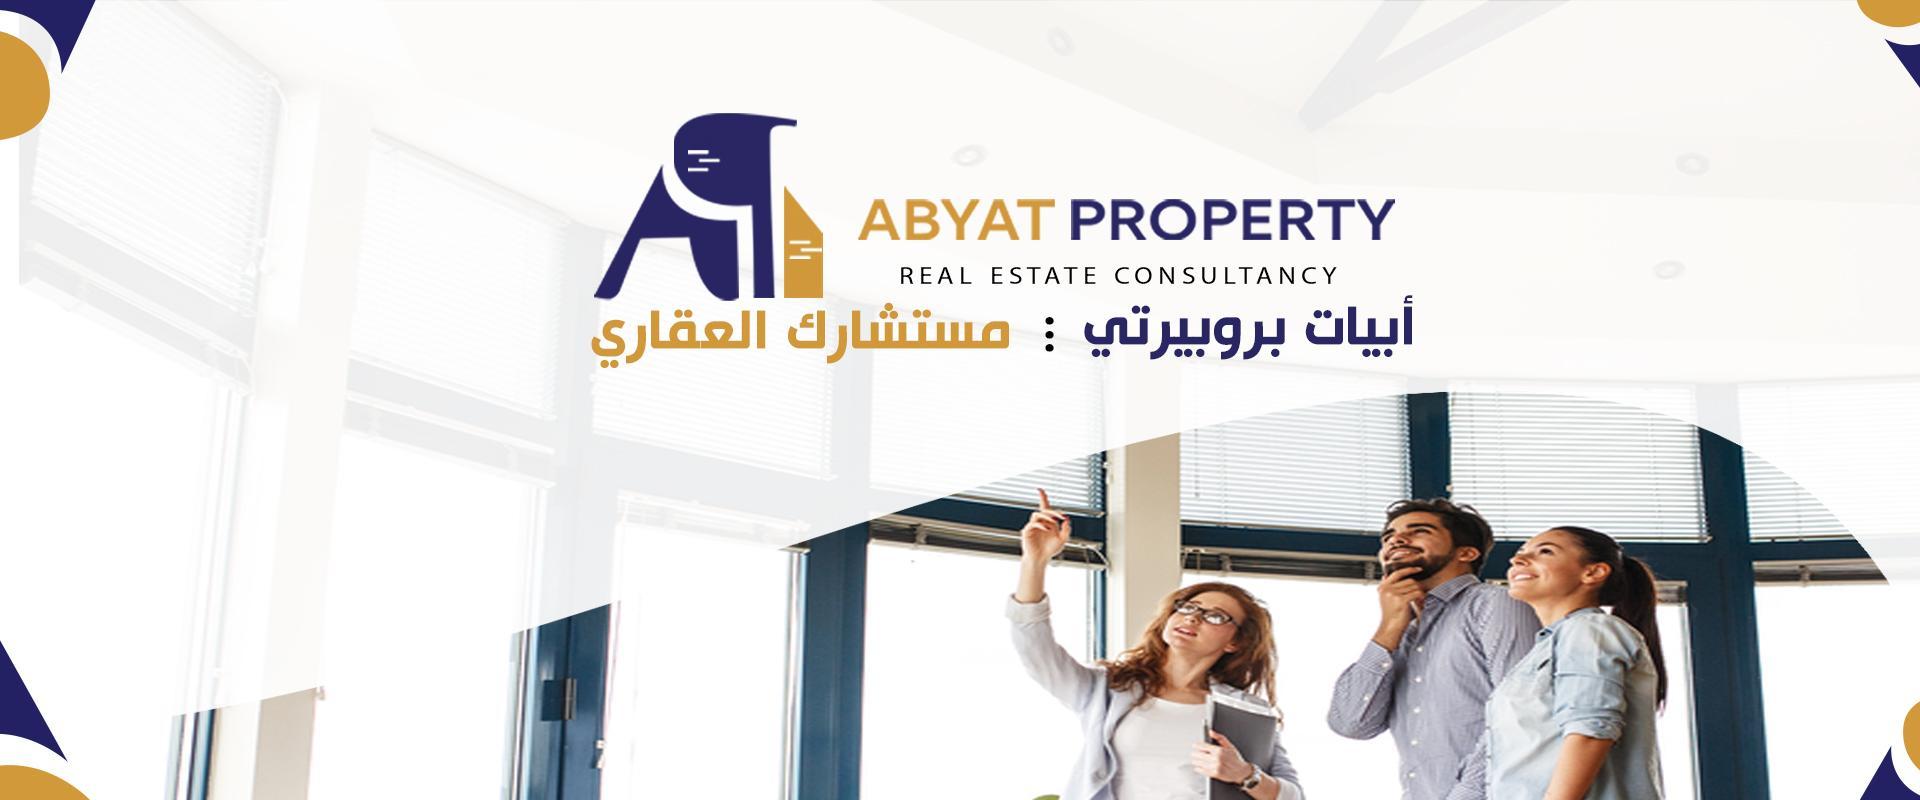 abyat property real estate consultant